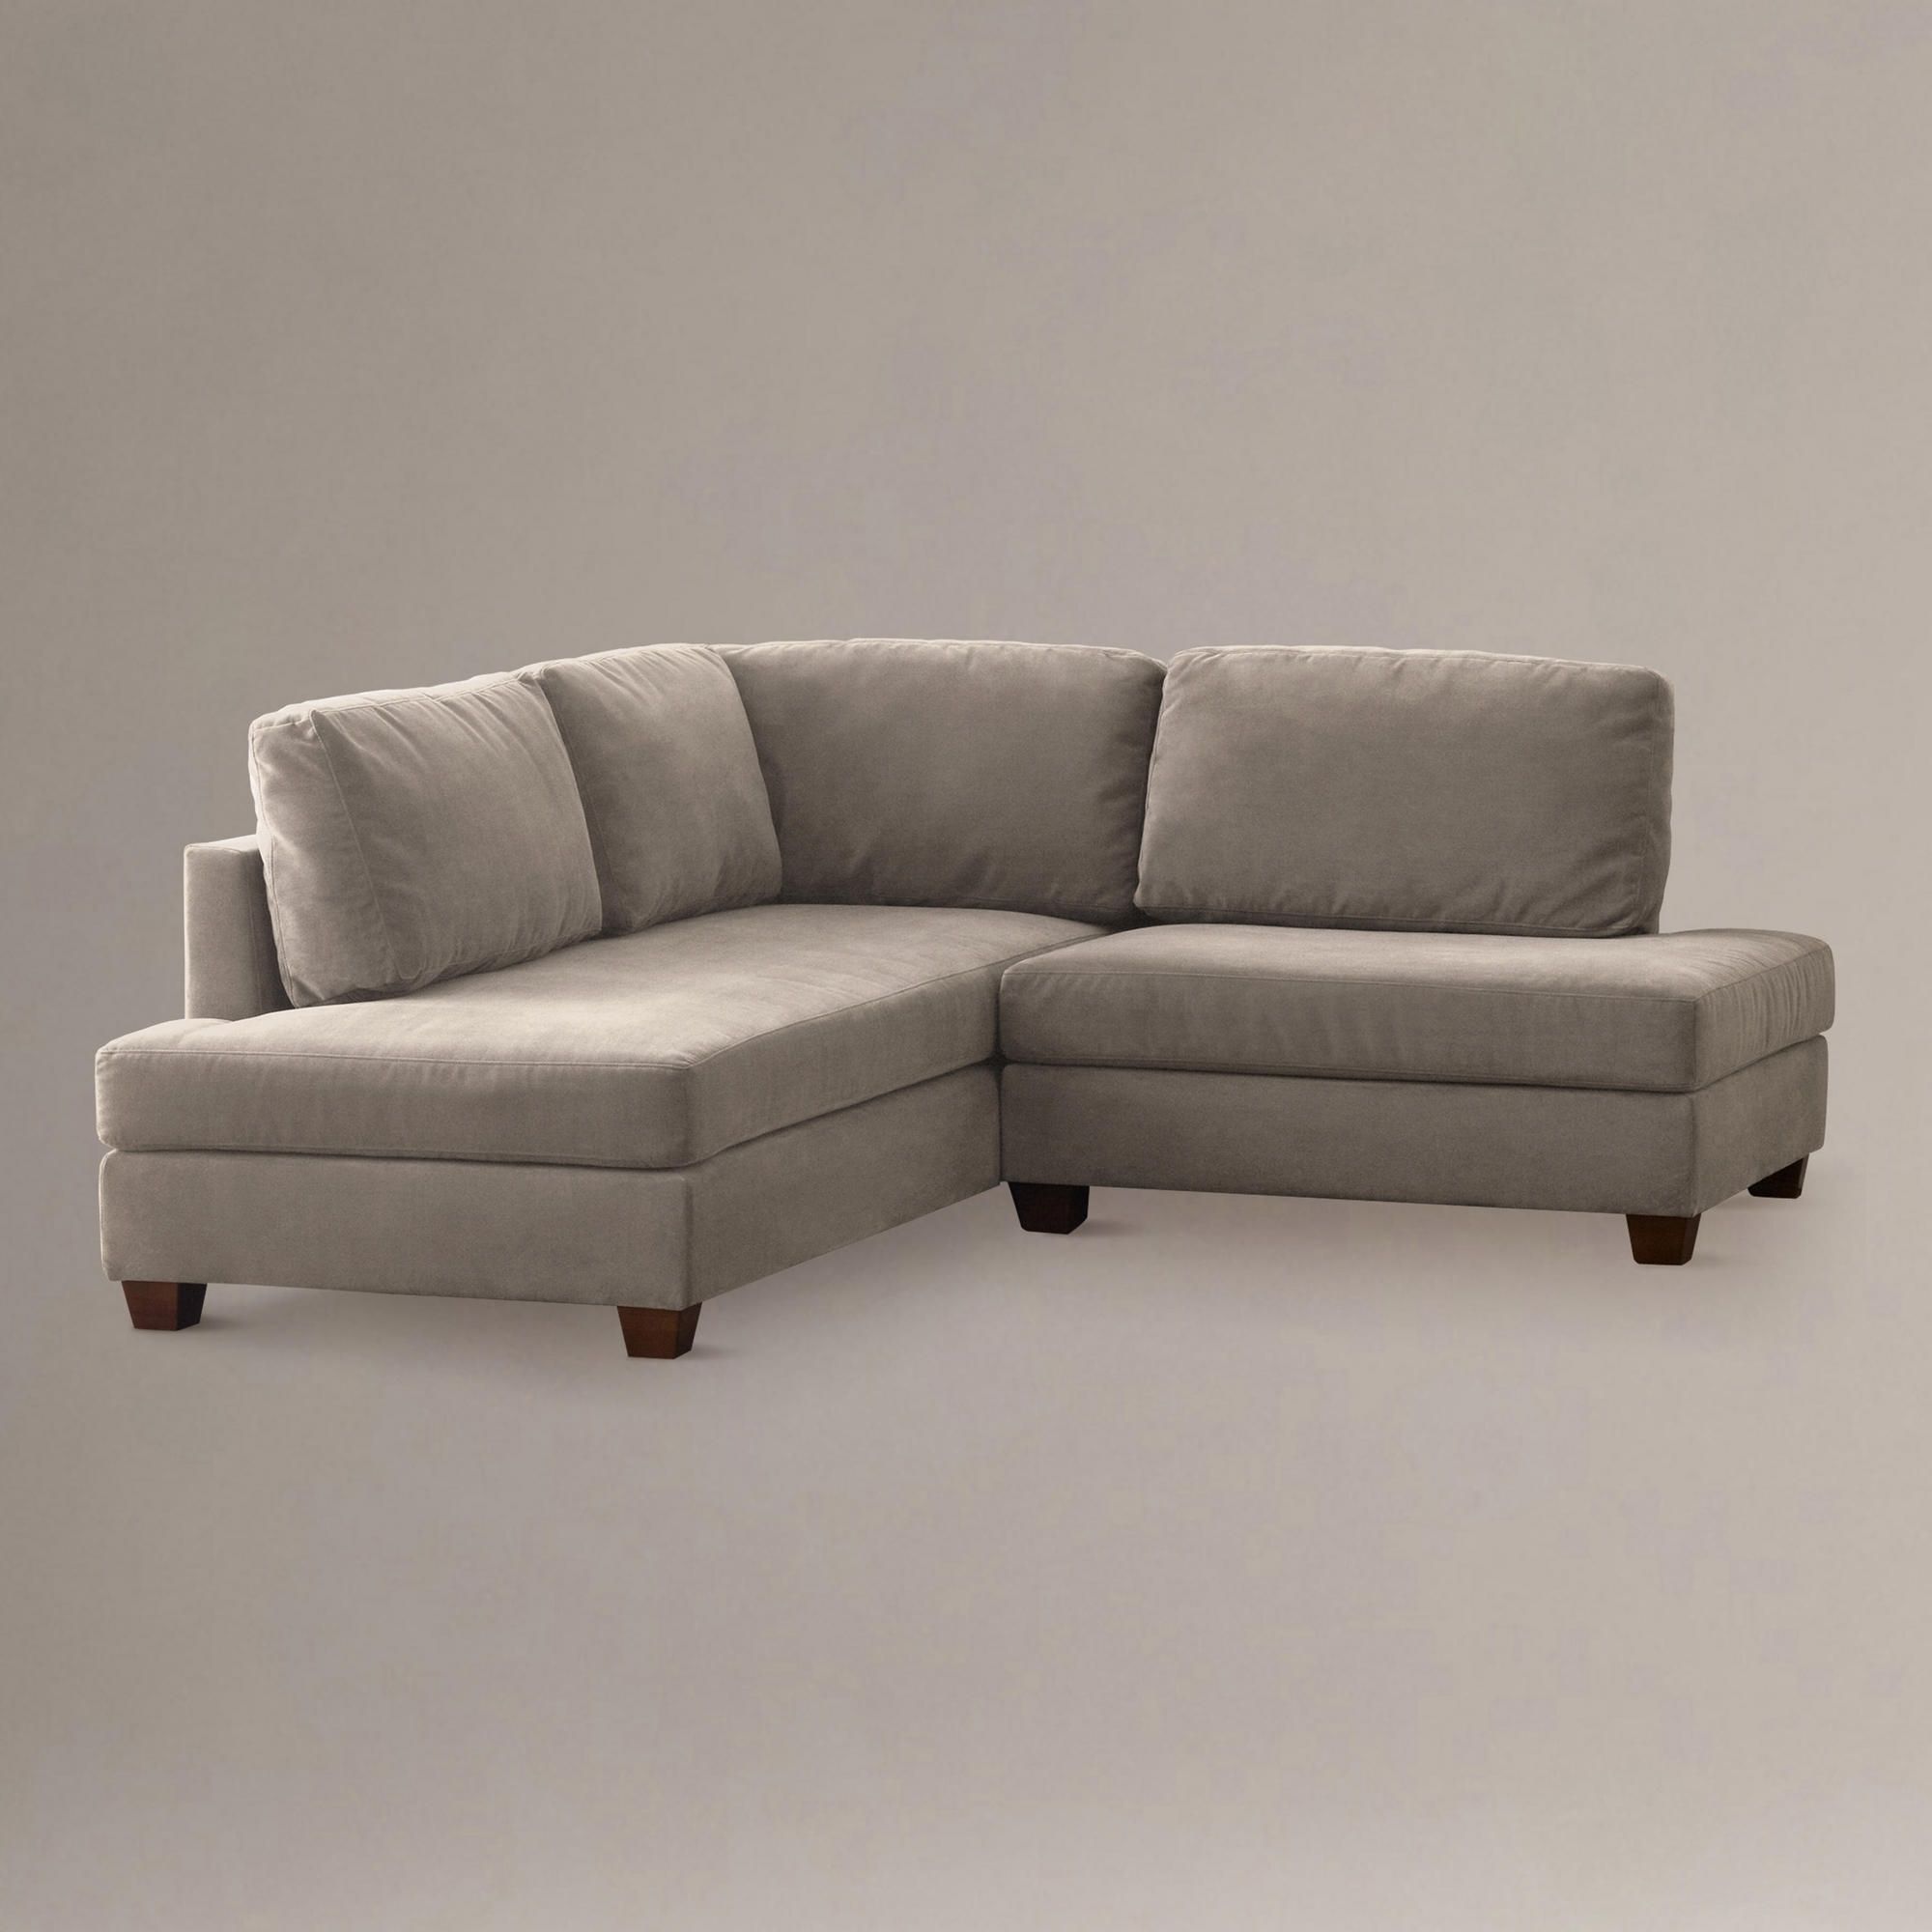 Most Recent Amazing Armless Sectional Sofas Small Spaces – Mediasupload With Armless Sectional Sofas (Photo 3 of 15)